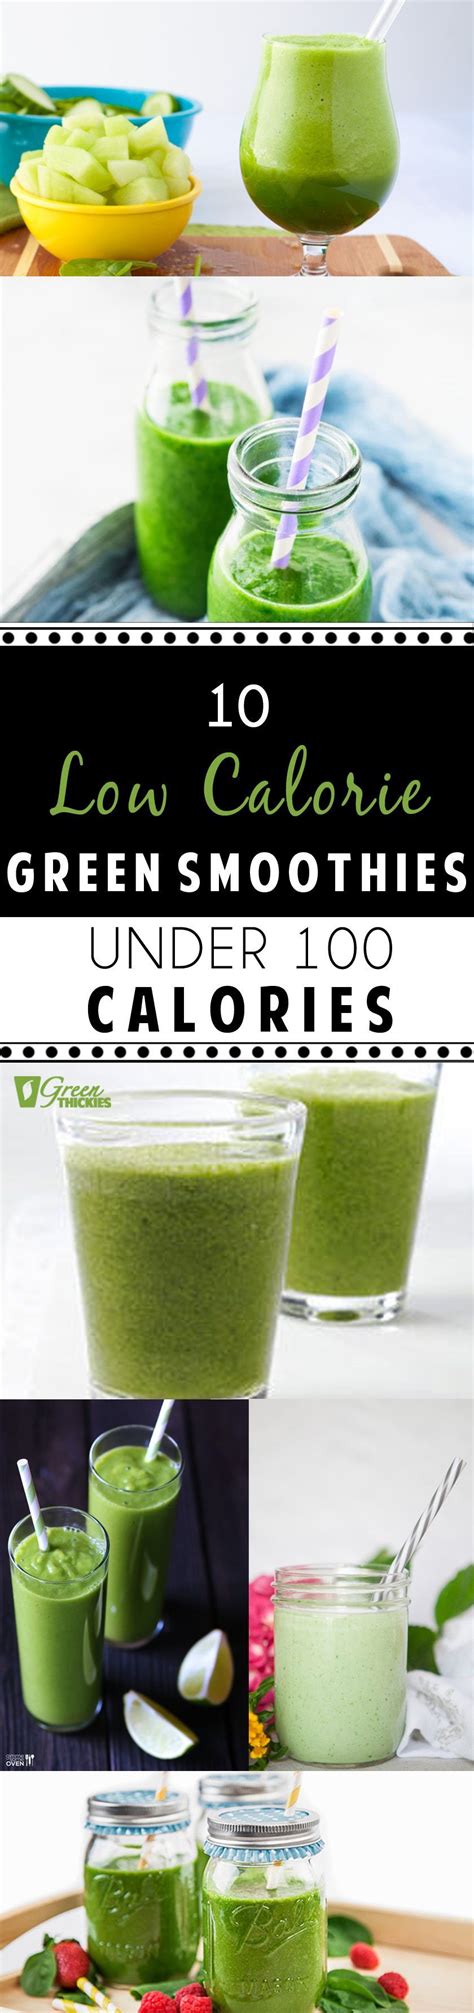 Bottled juice bought off of the self really doesn't have much. 10 Low Calorie Green Smoothies Under 100 Calories | Juice smoothies recipes, Green smoothie ...